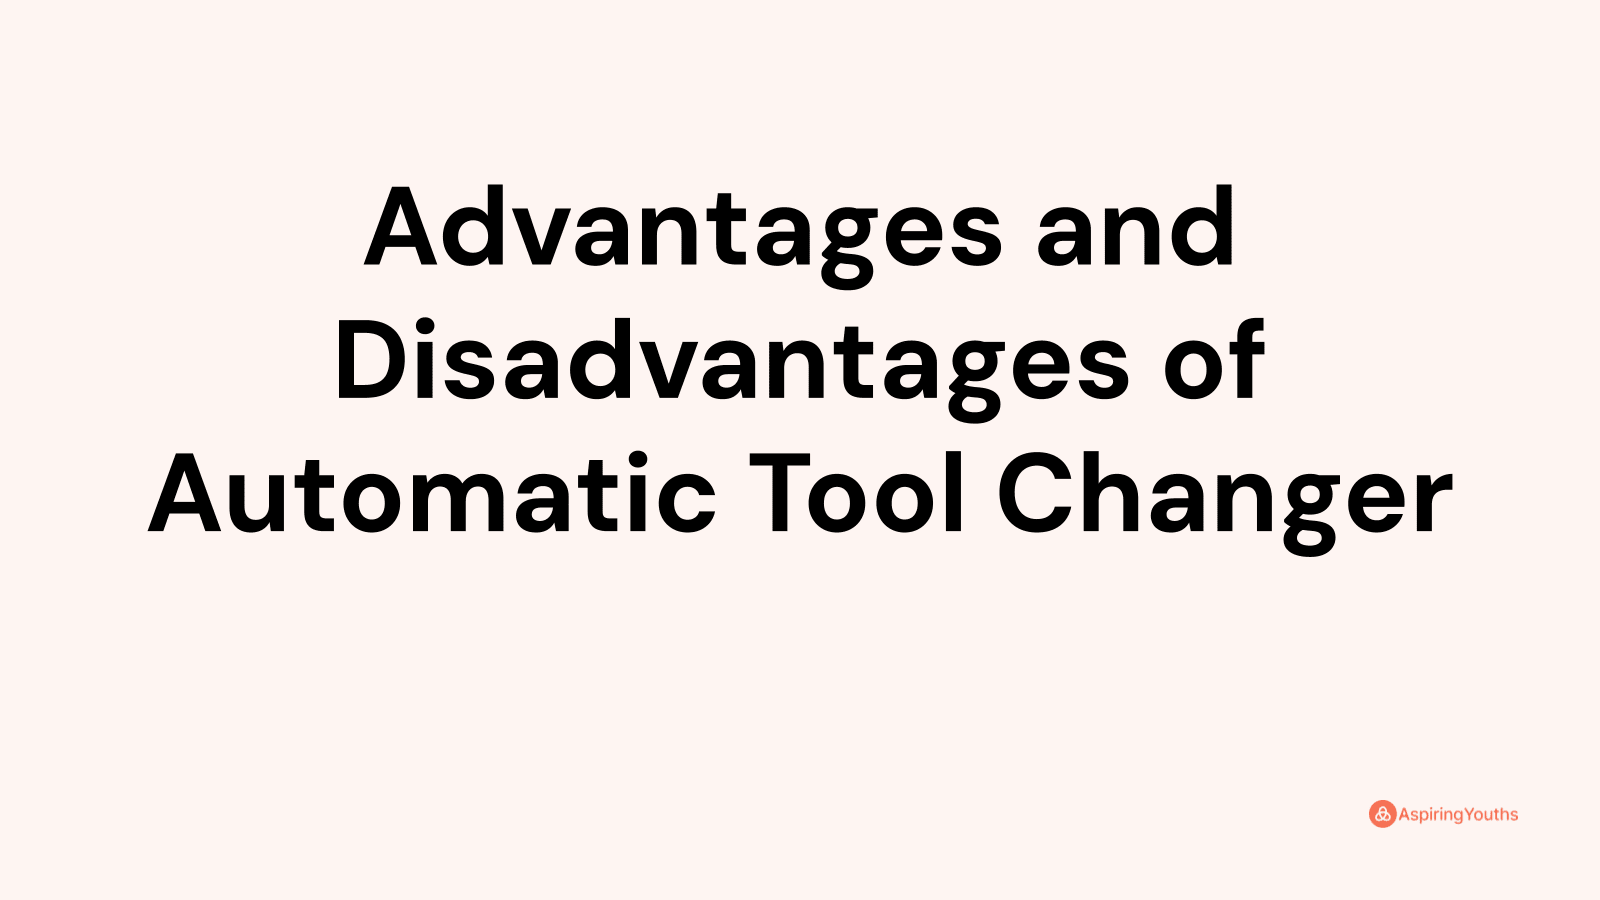 Advantages and disadvantages of Automatic Tool Changer